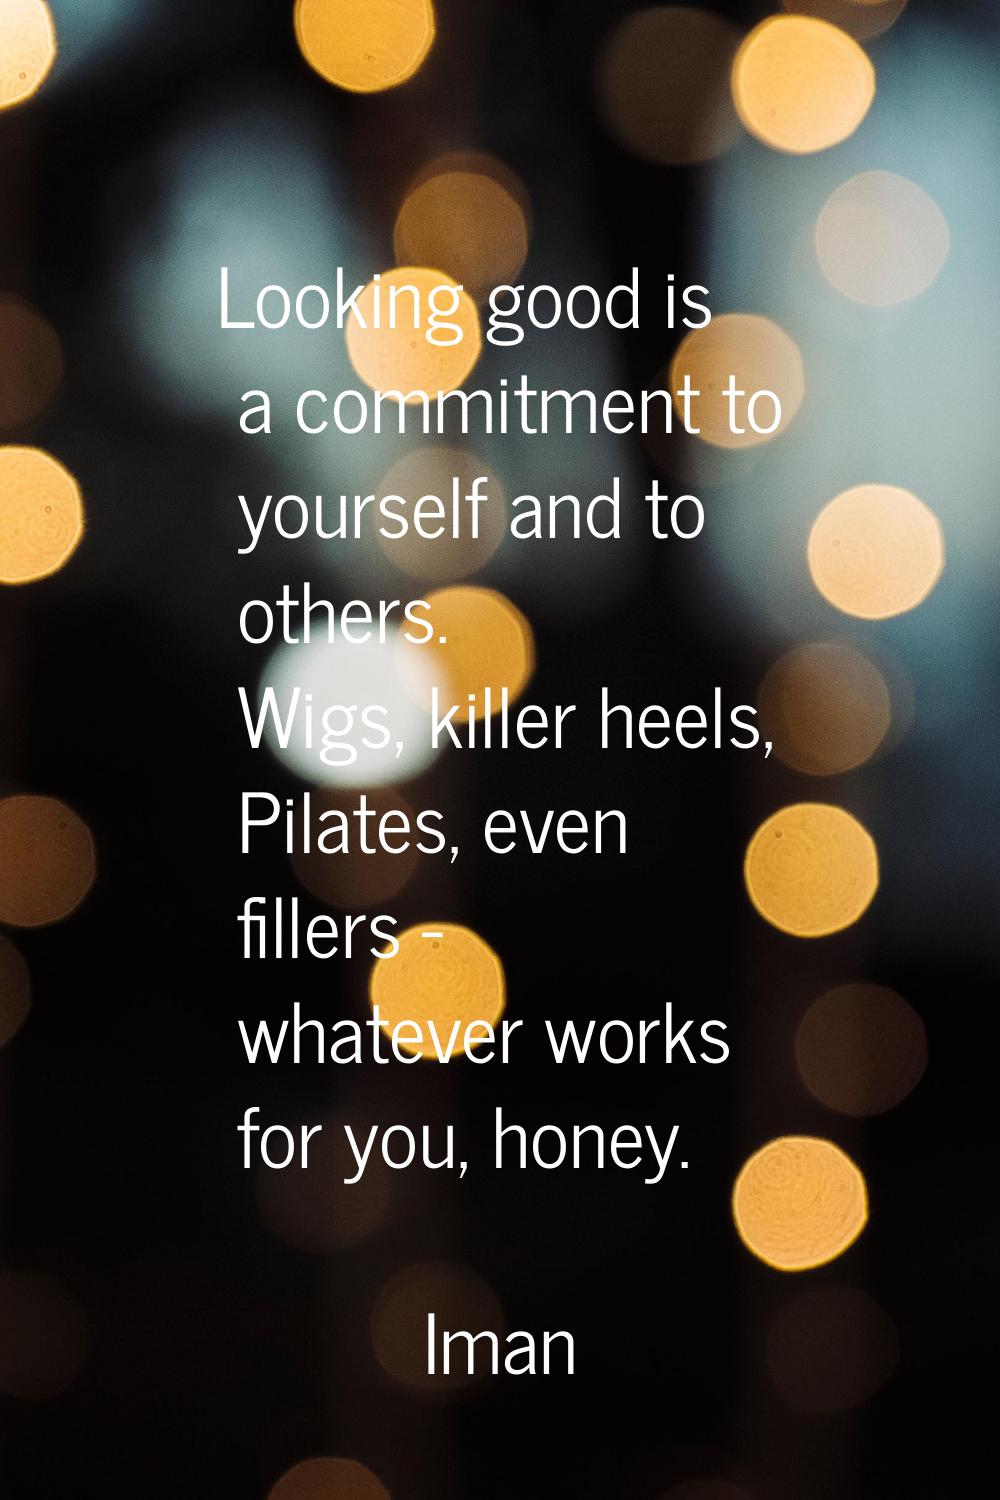 Looking good is a commitment to yourself and to others. Wigs, killer heels, Pilates, even fillers -